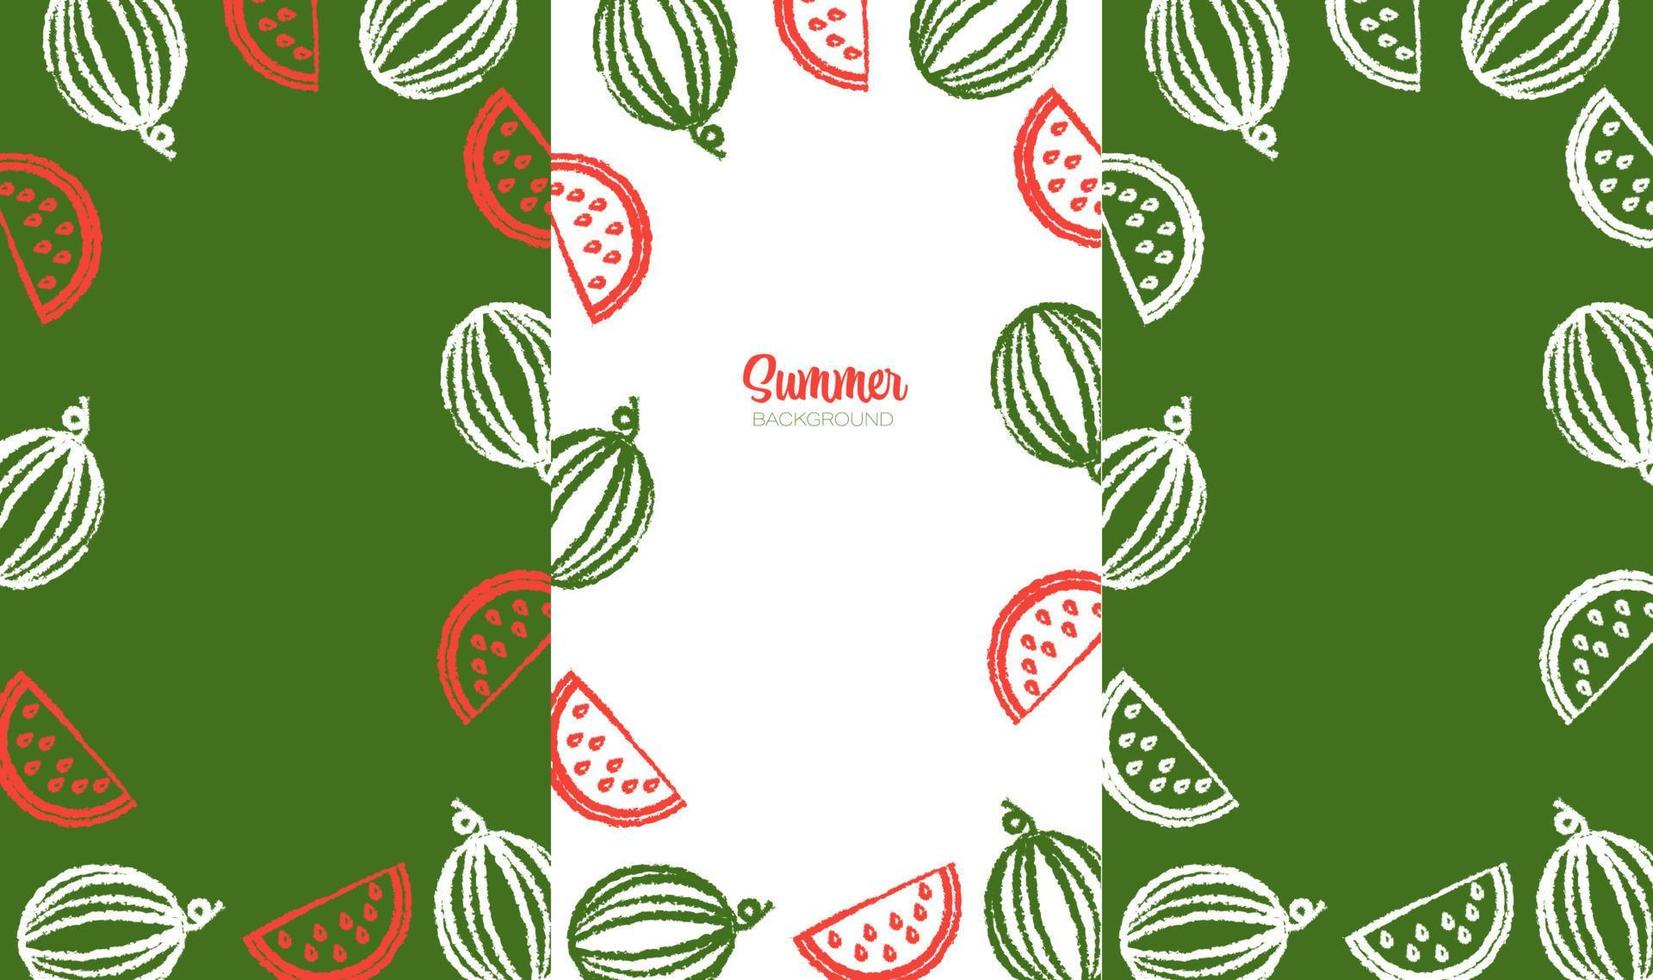 Vector Graphic Frames of Watermelons and Watermelon Slices